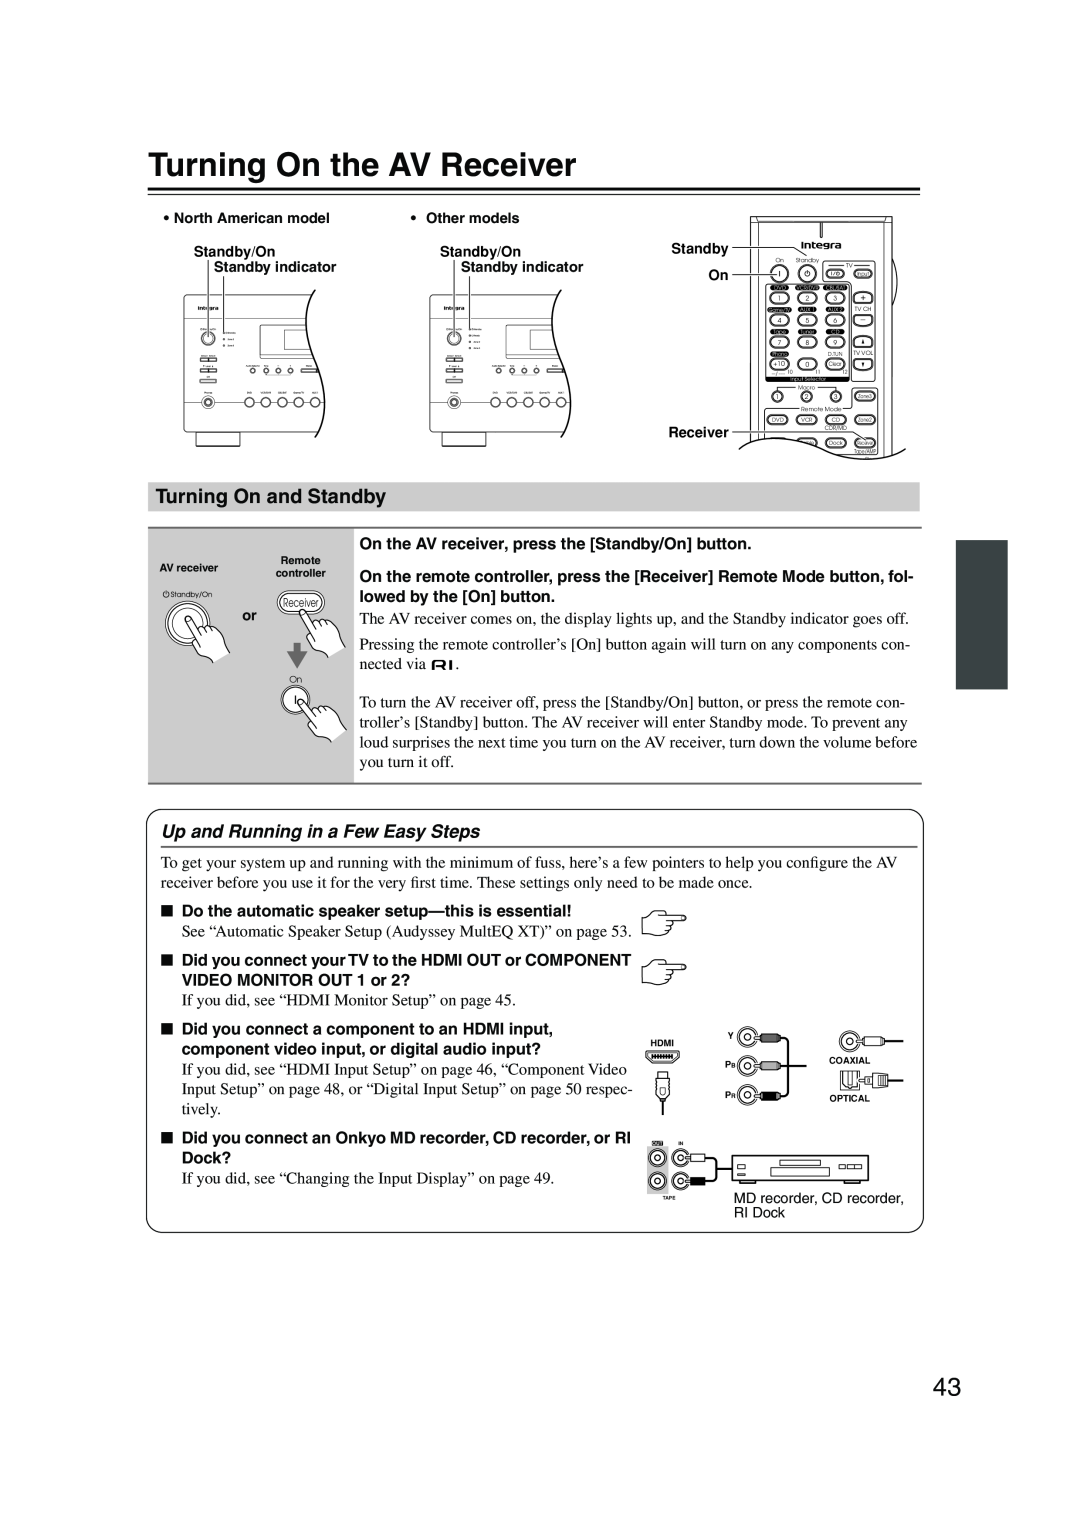 Integra DTR-7.8 instruction manual Turning On the AV Receiver, Turning On and Standby, Up and Running in a Few Easy Steps 